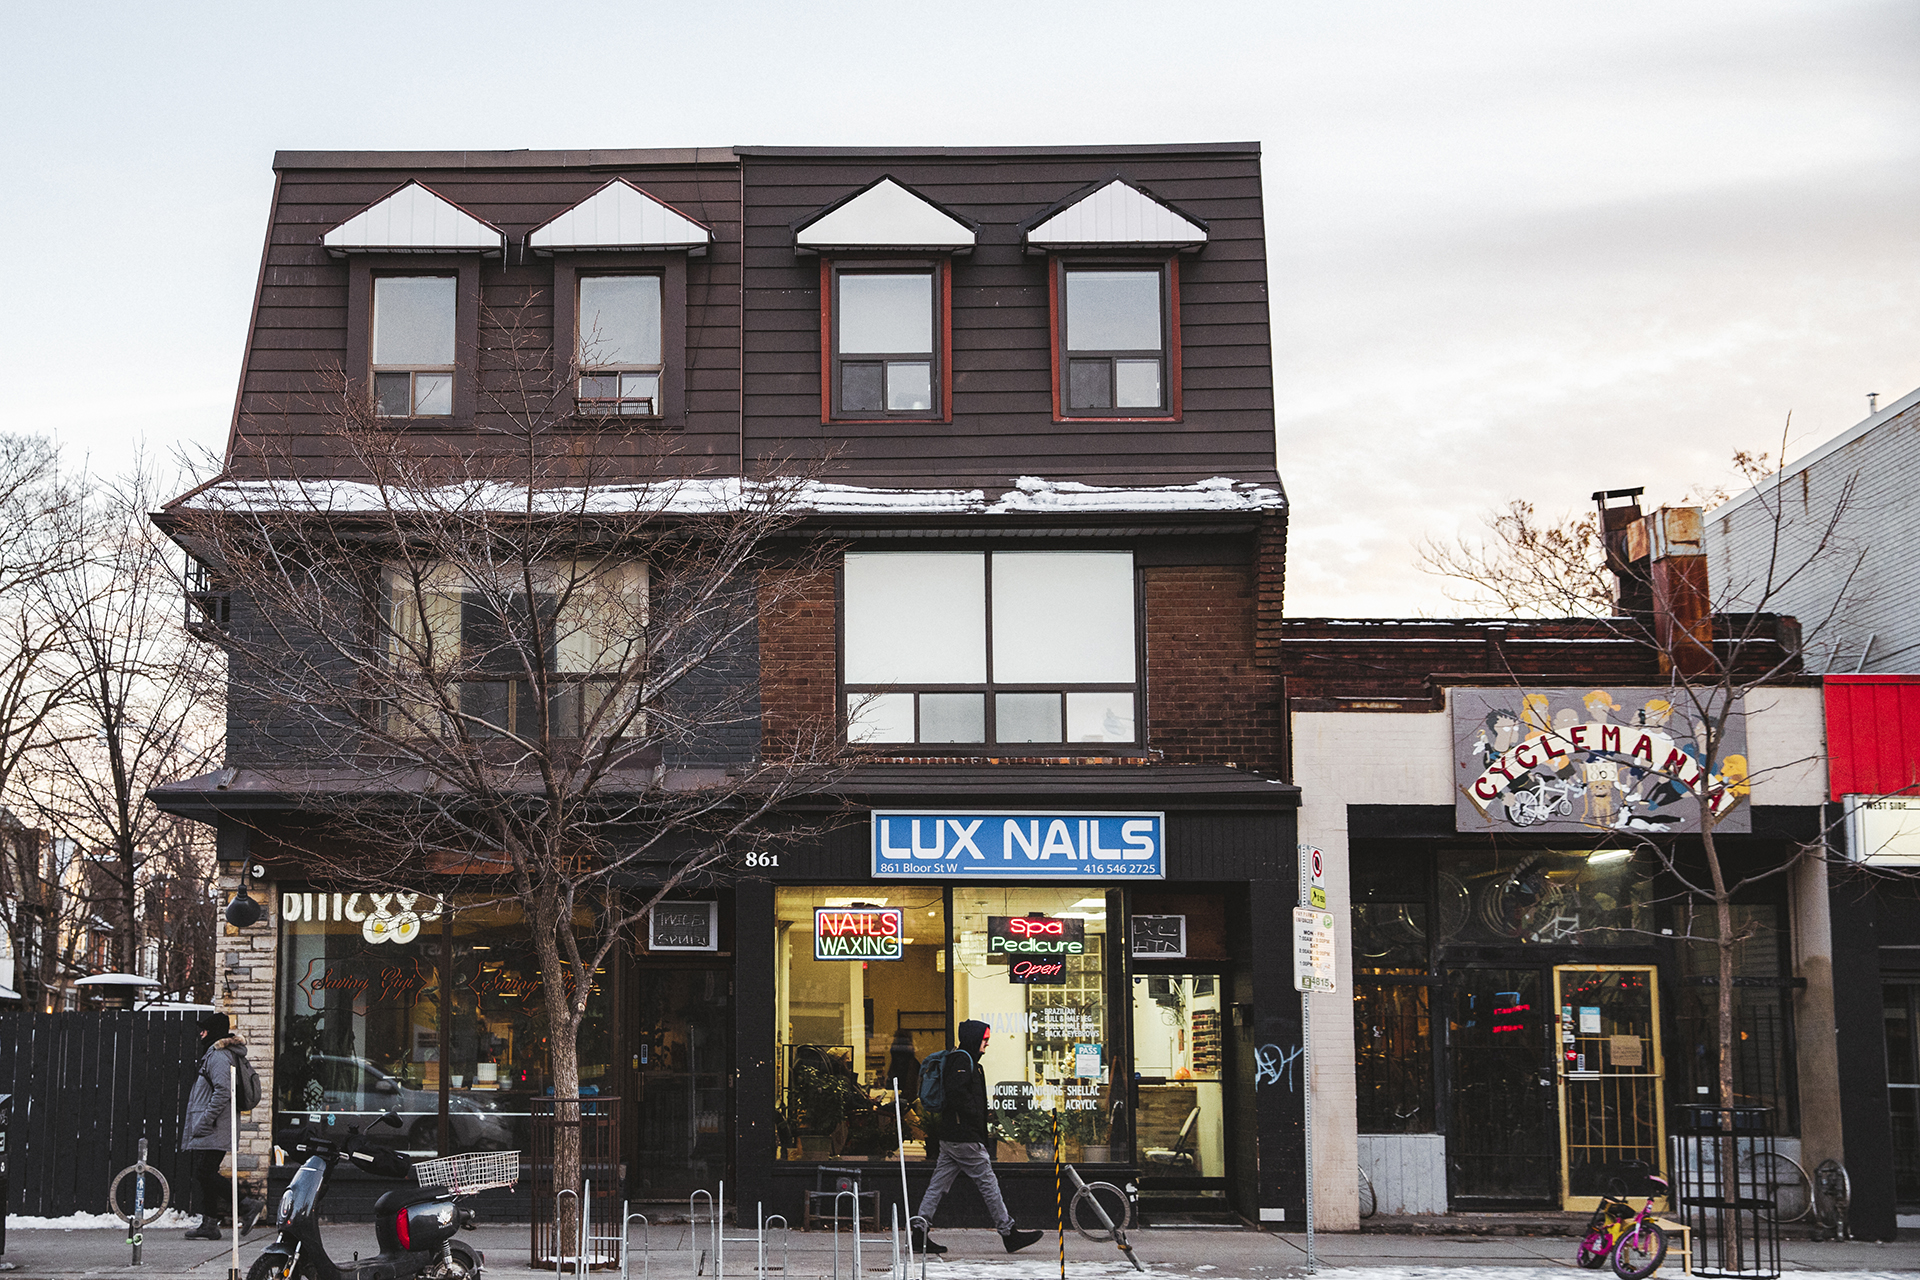 A small townhouse-style building photographed from across the street. There is a sign on the building white says "LUX NAILS," indicating the building houses a nail salon business. In front of the building, there is a man walking by as well as a parked motorcycle. The light is soft and it appears as though it is sunset.